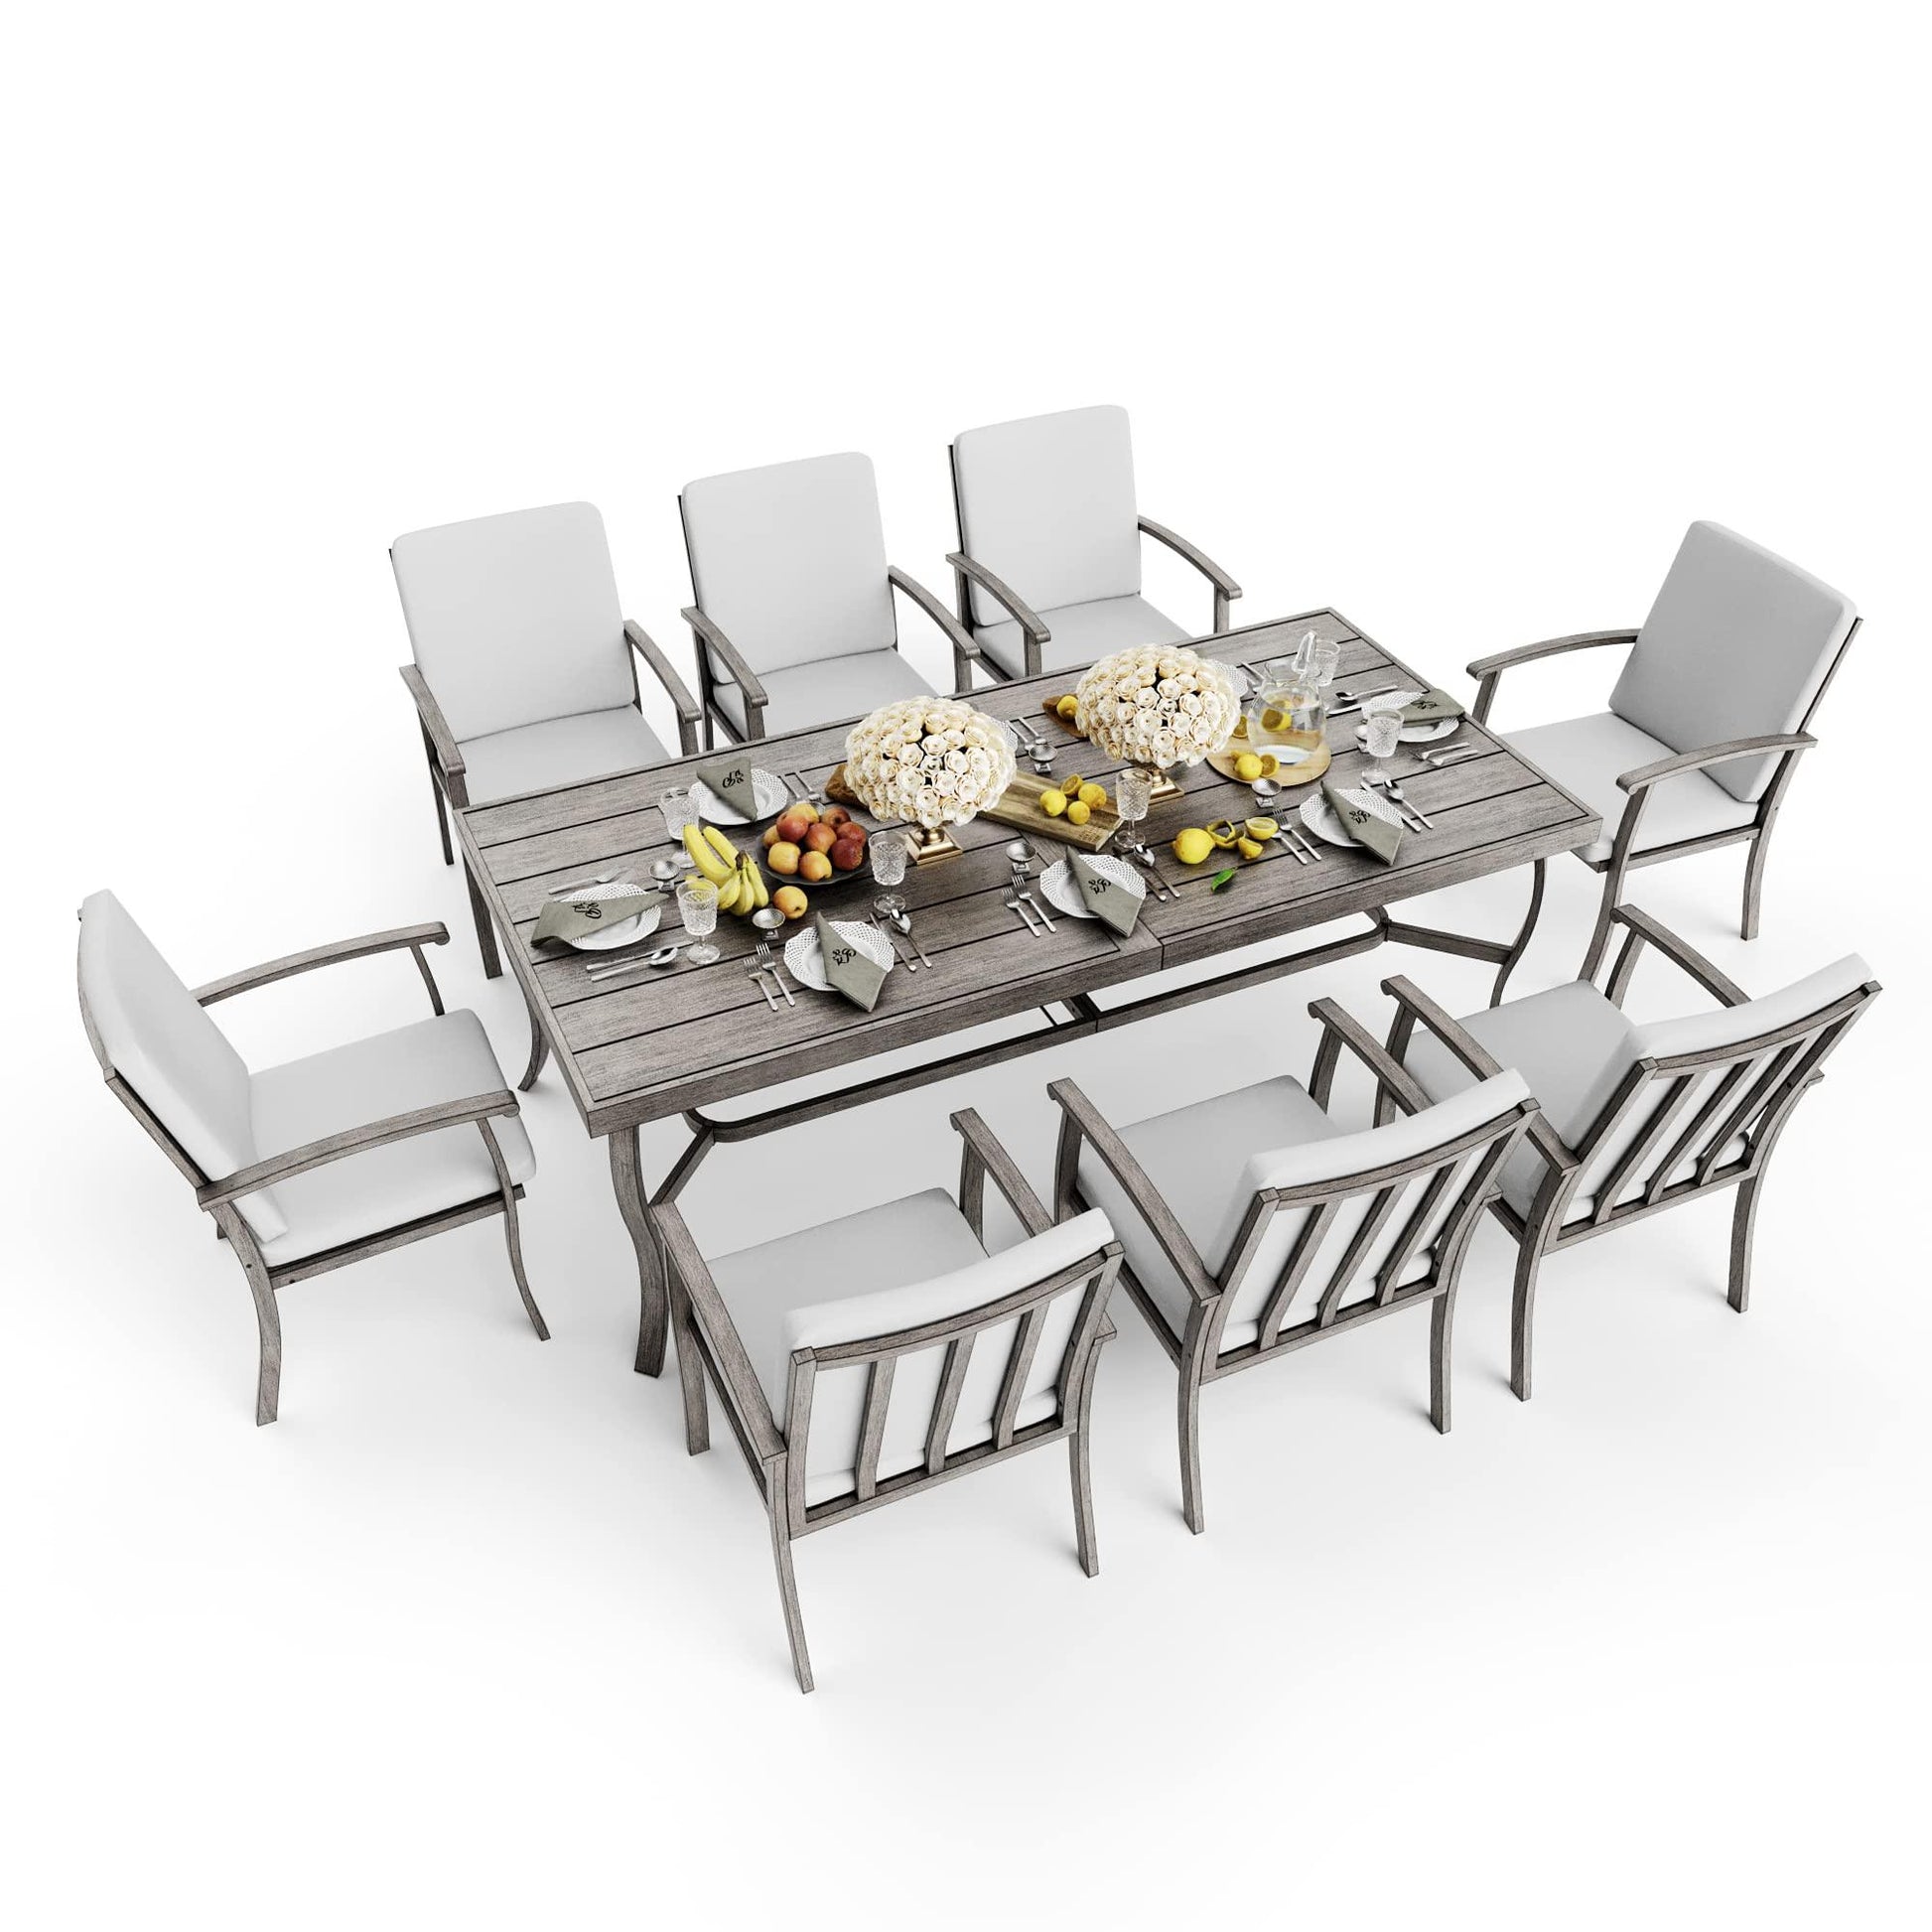 HAPPATIO 9 Piece Patio Dining Set, Aluminum Outdoor Dining Set for 8, Aluminum Dining Table and Chairs Set, Patio Dining Furniture with Aluminum Table, Chairs and Washable Cushions (Gray) - CookCave